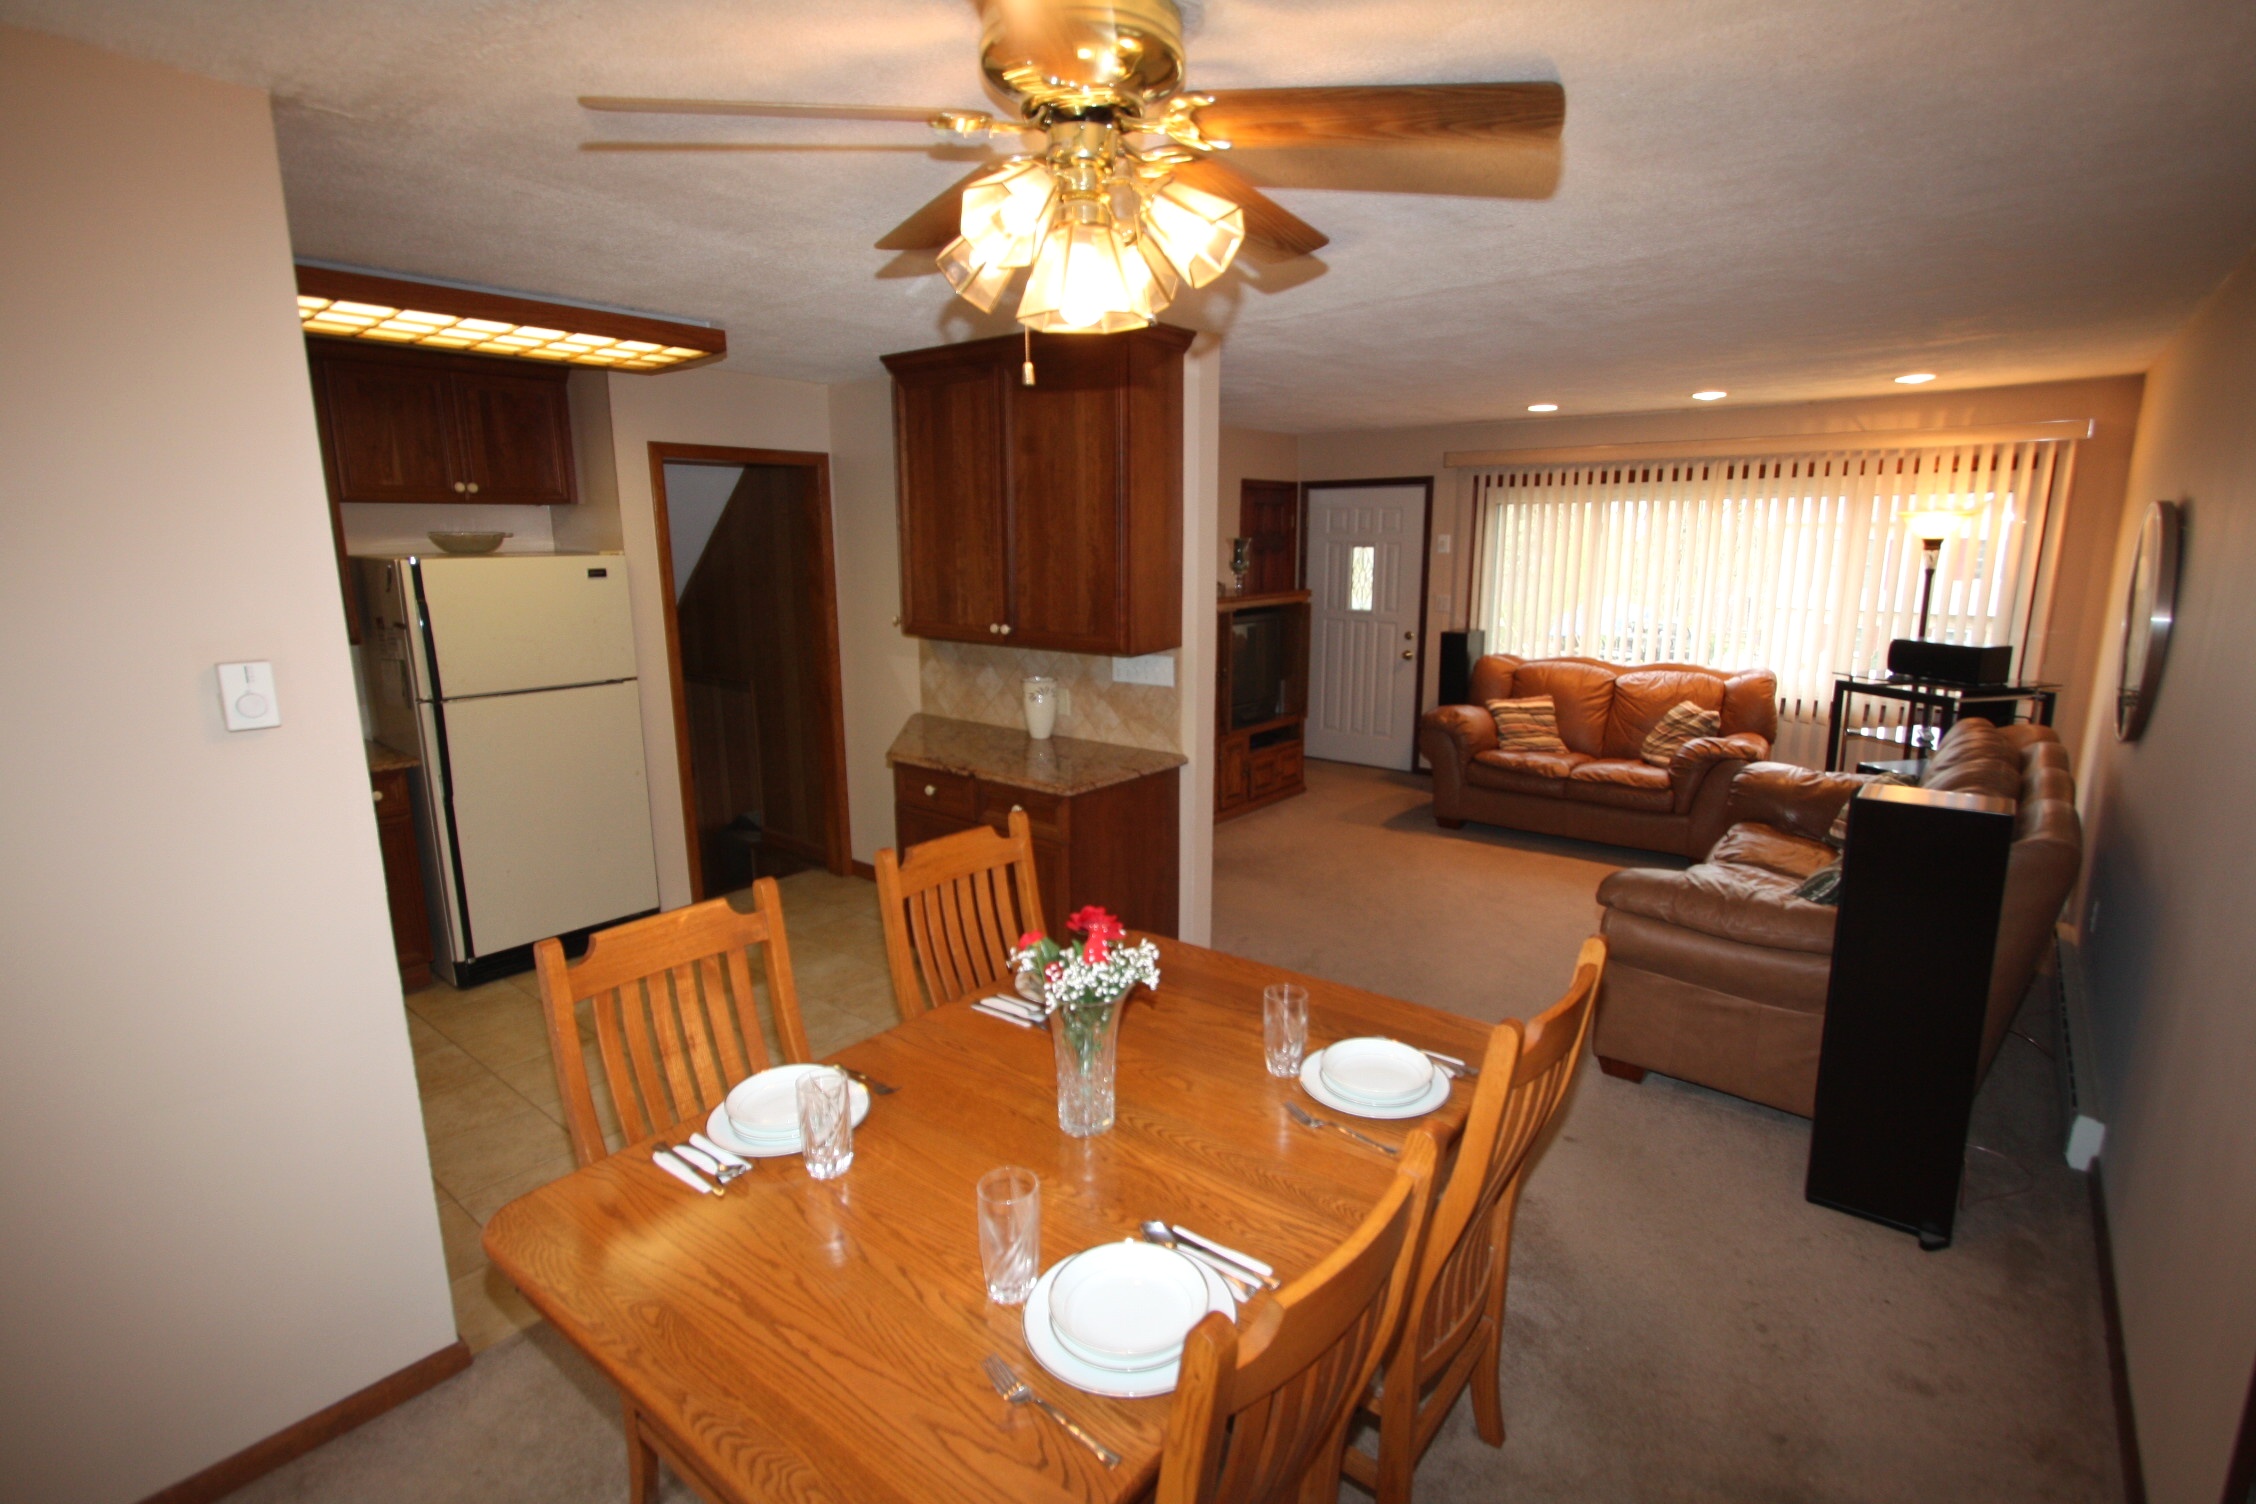 Dining Room Ceiling Fan With Light Lit